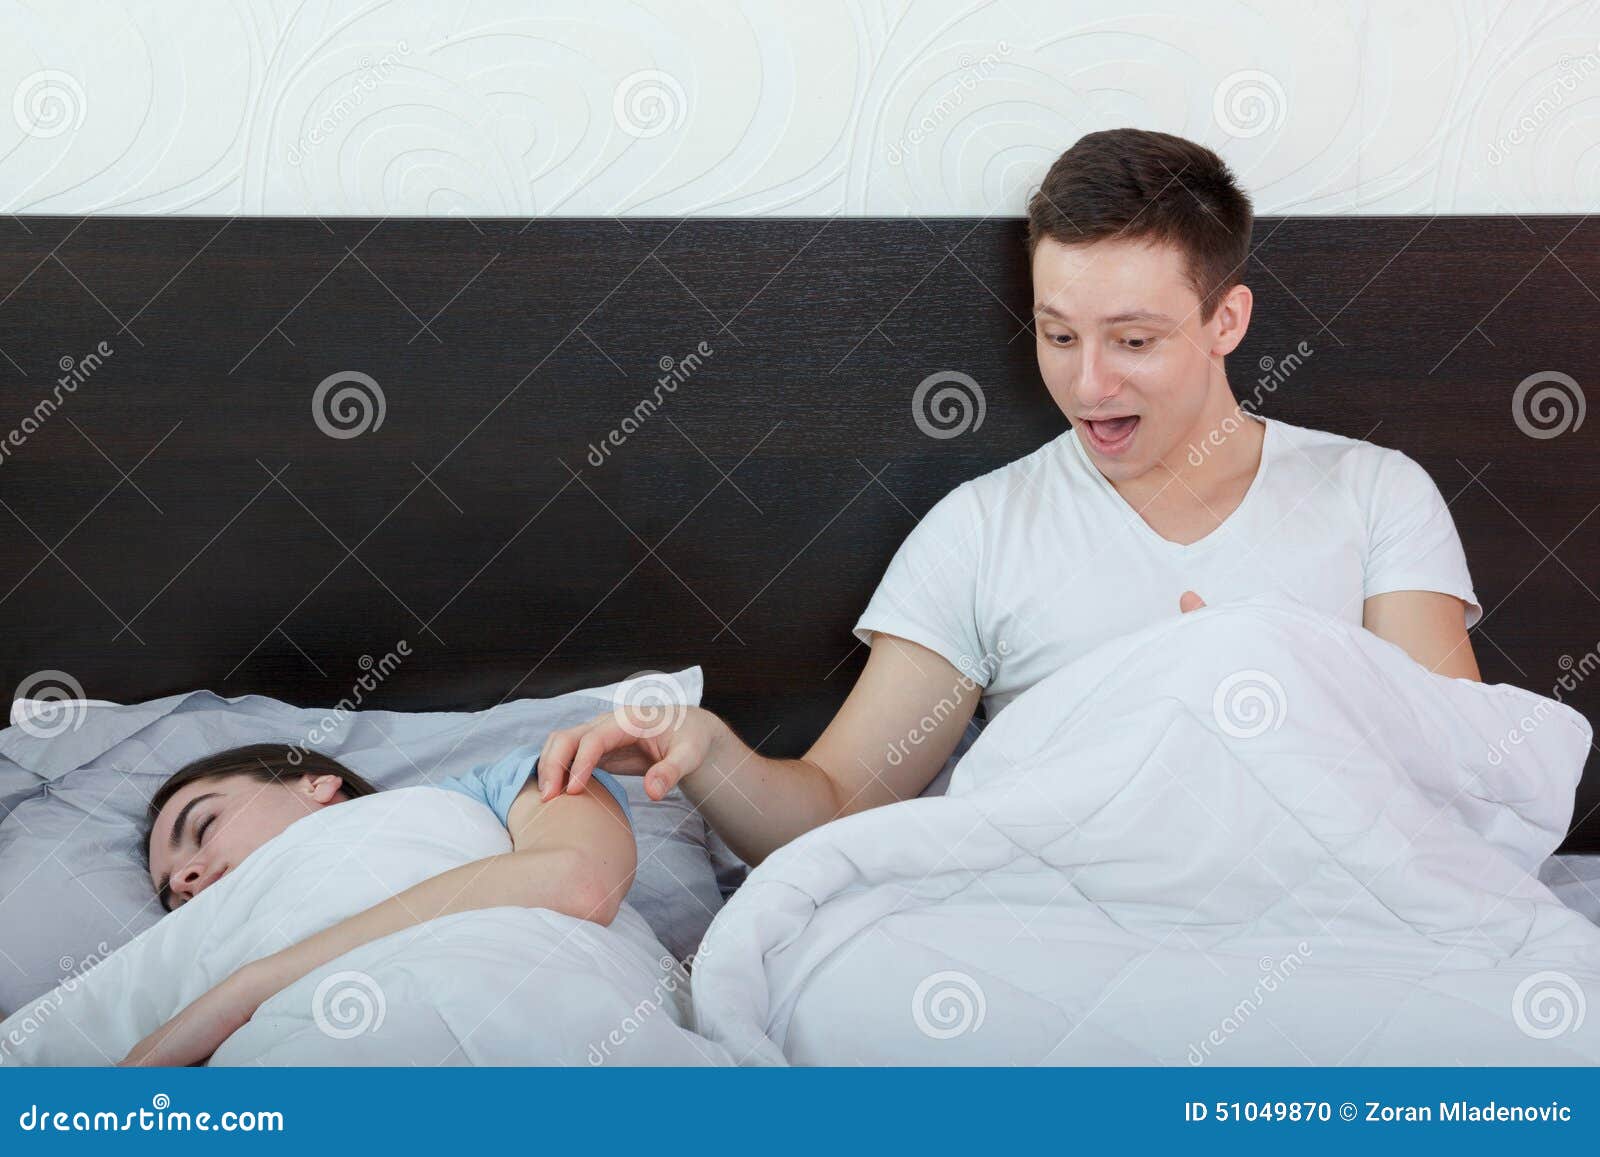 Man Having Problem with Impotence Sitting on Bed Waking Up His Stock Photo 